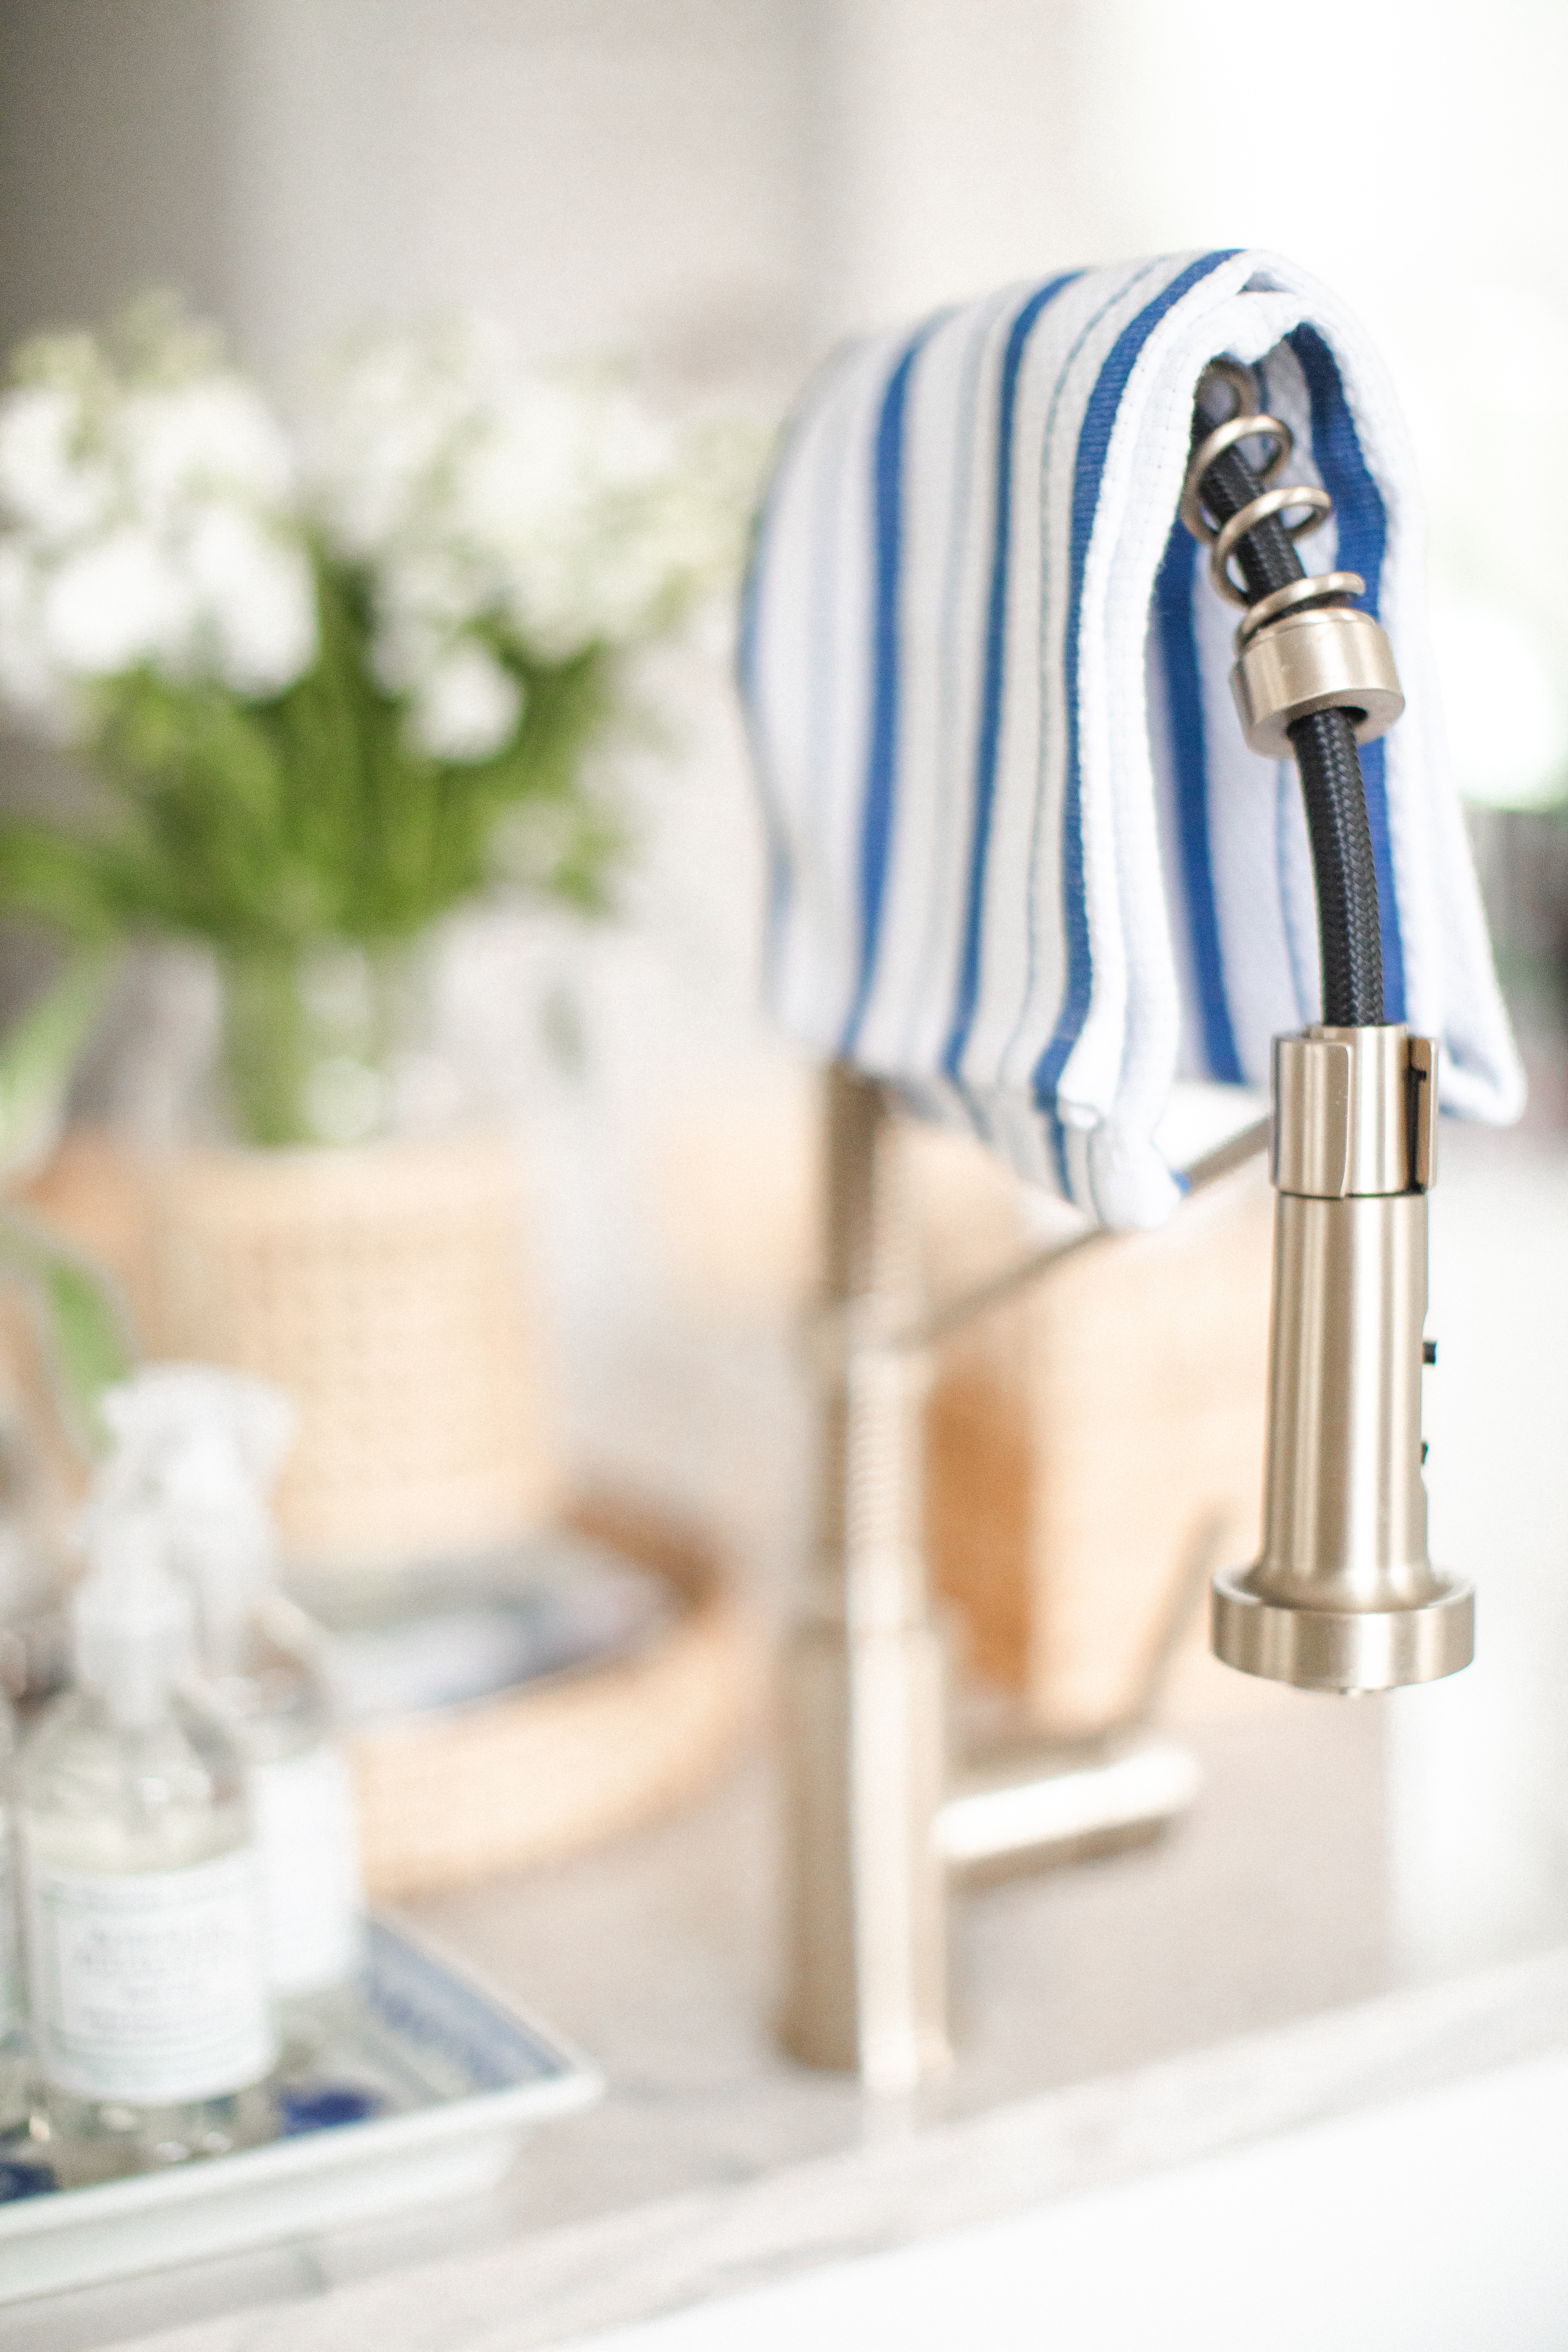 Kitchen sink faucet with dish towel hanging